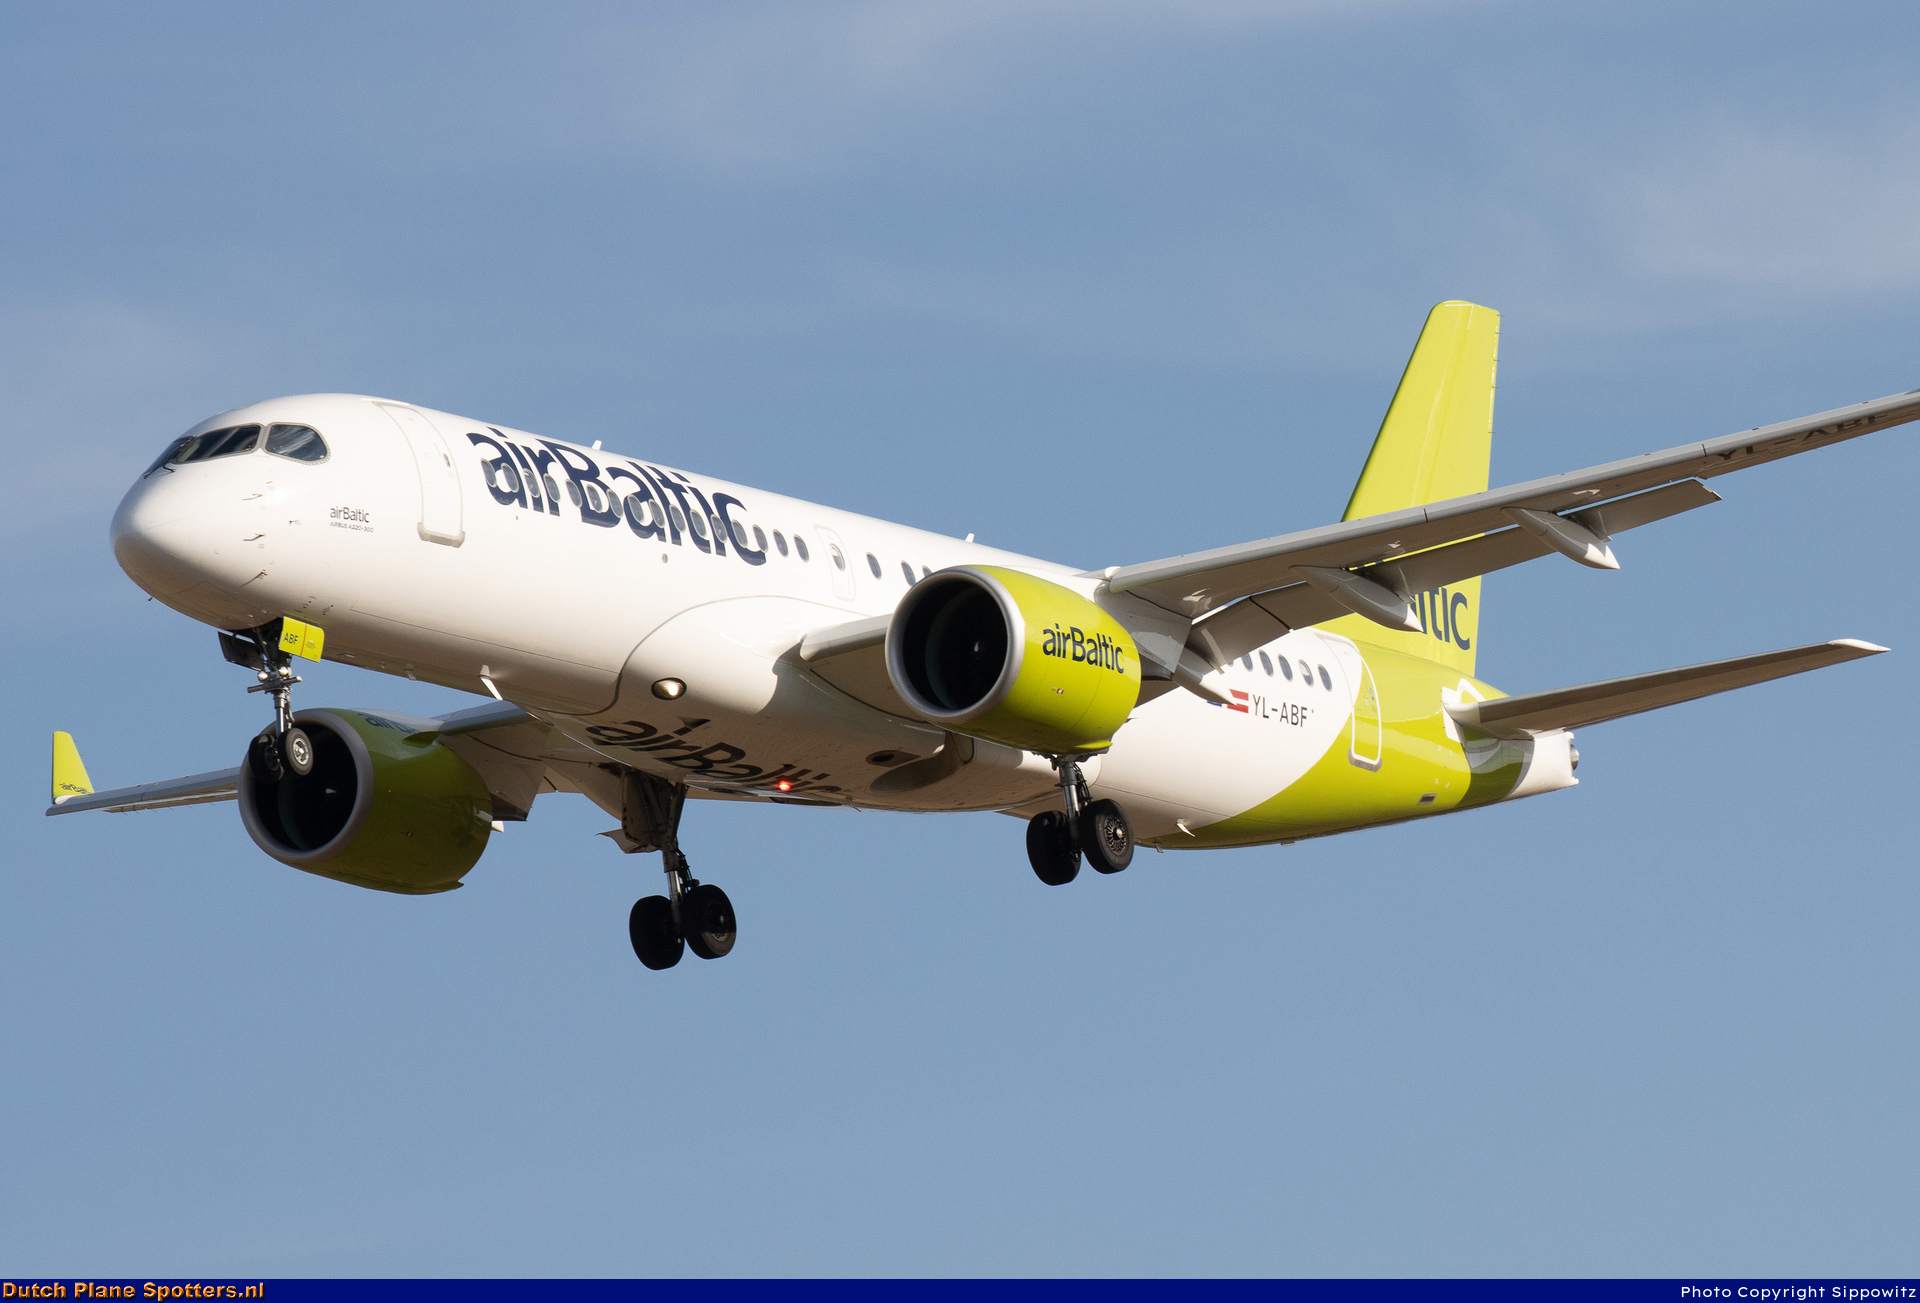 YL-ABF Airbus A220-300 Air Baltic by Sippowitz